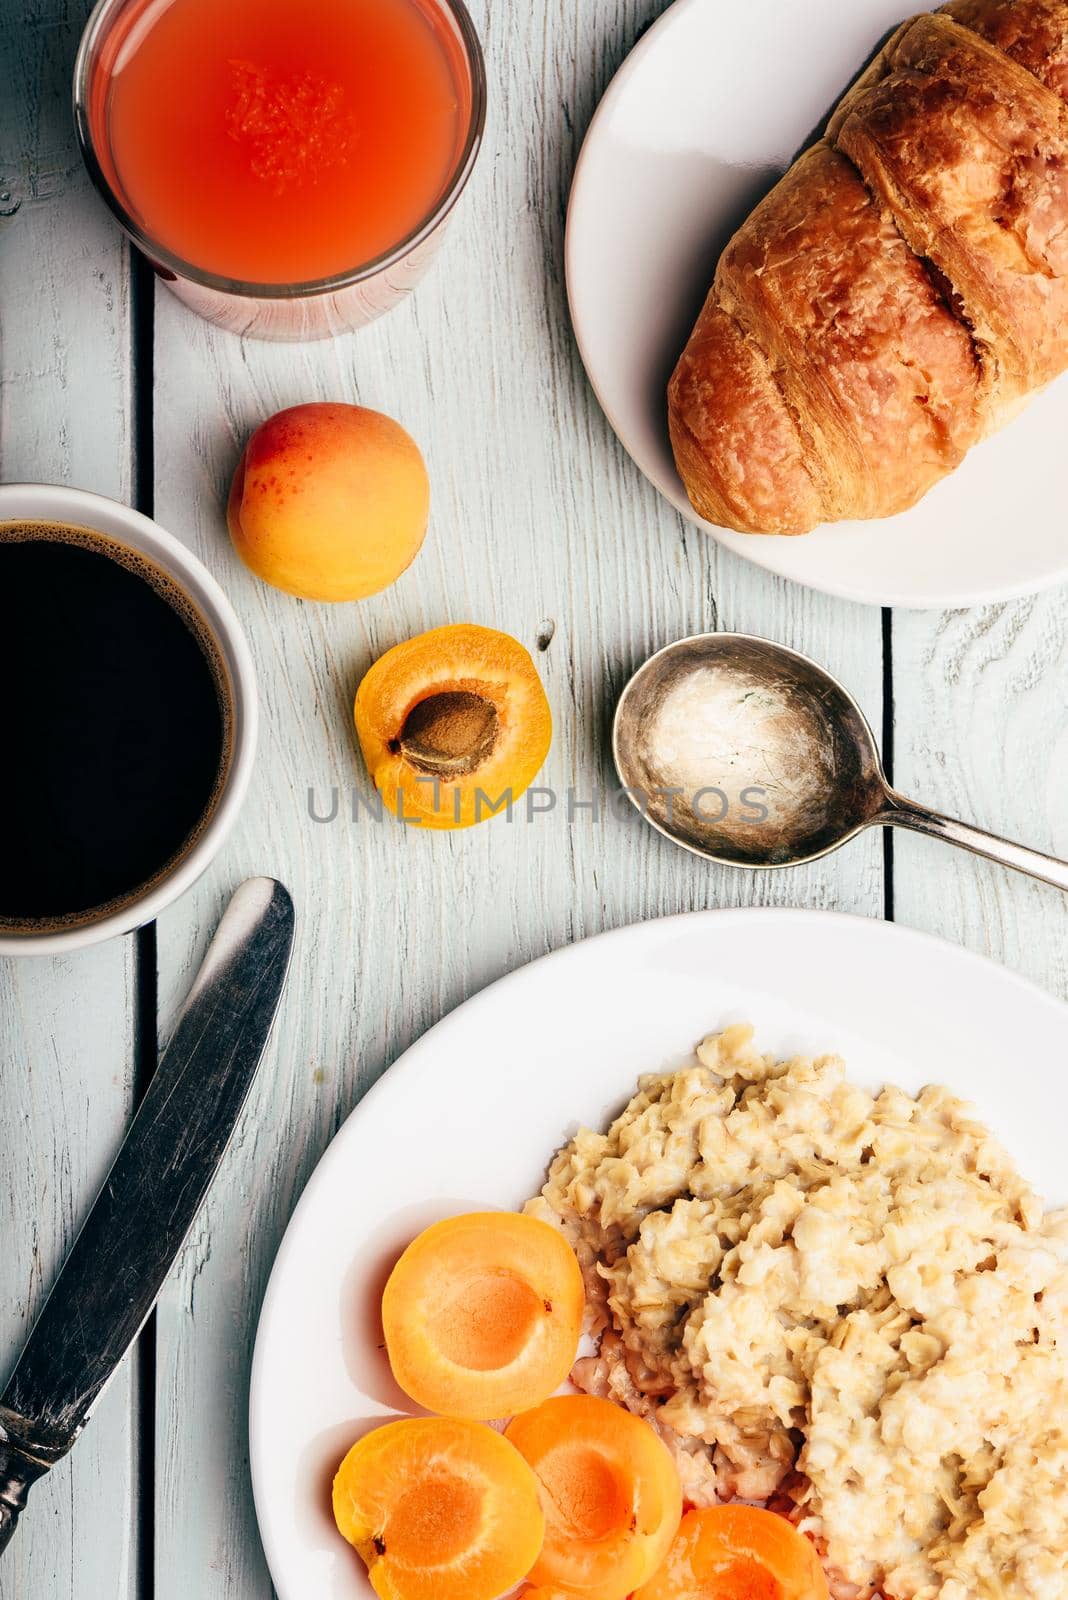 Porridge with apricot, coffee, glass of juice and croissant by Seva_blsv